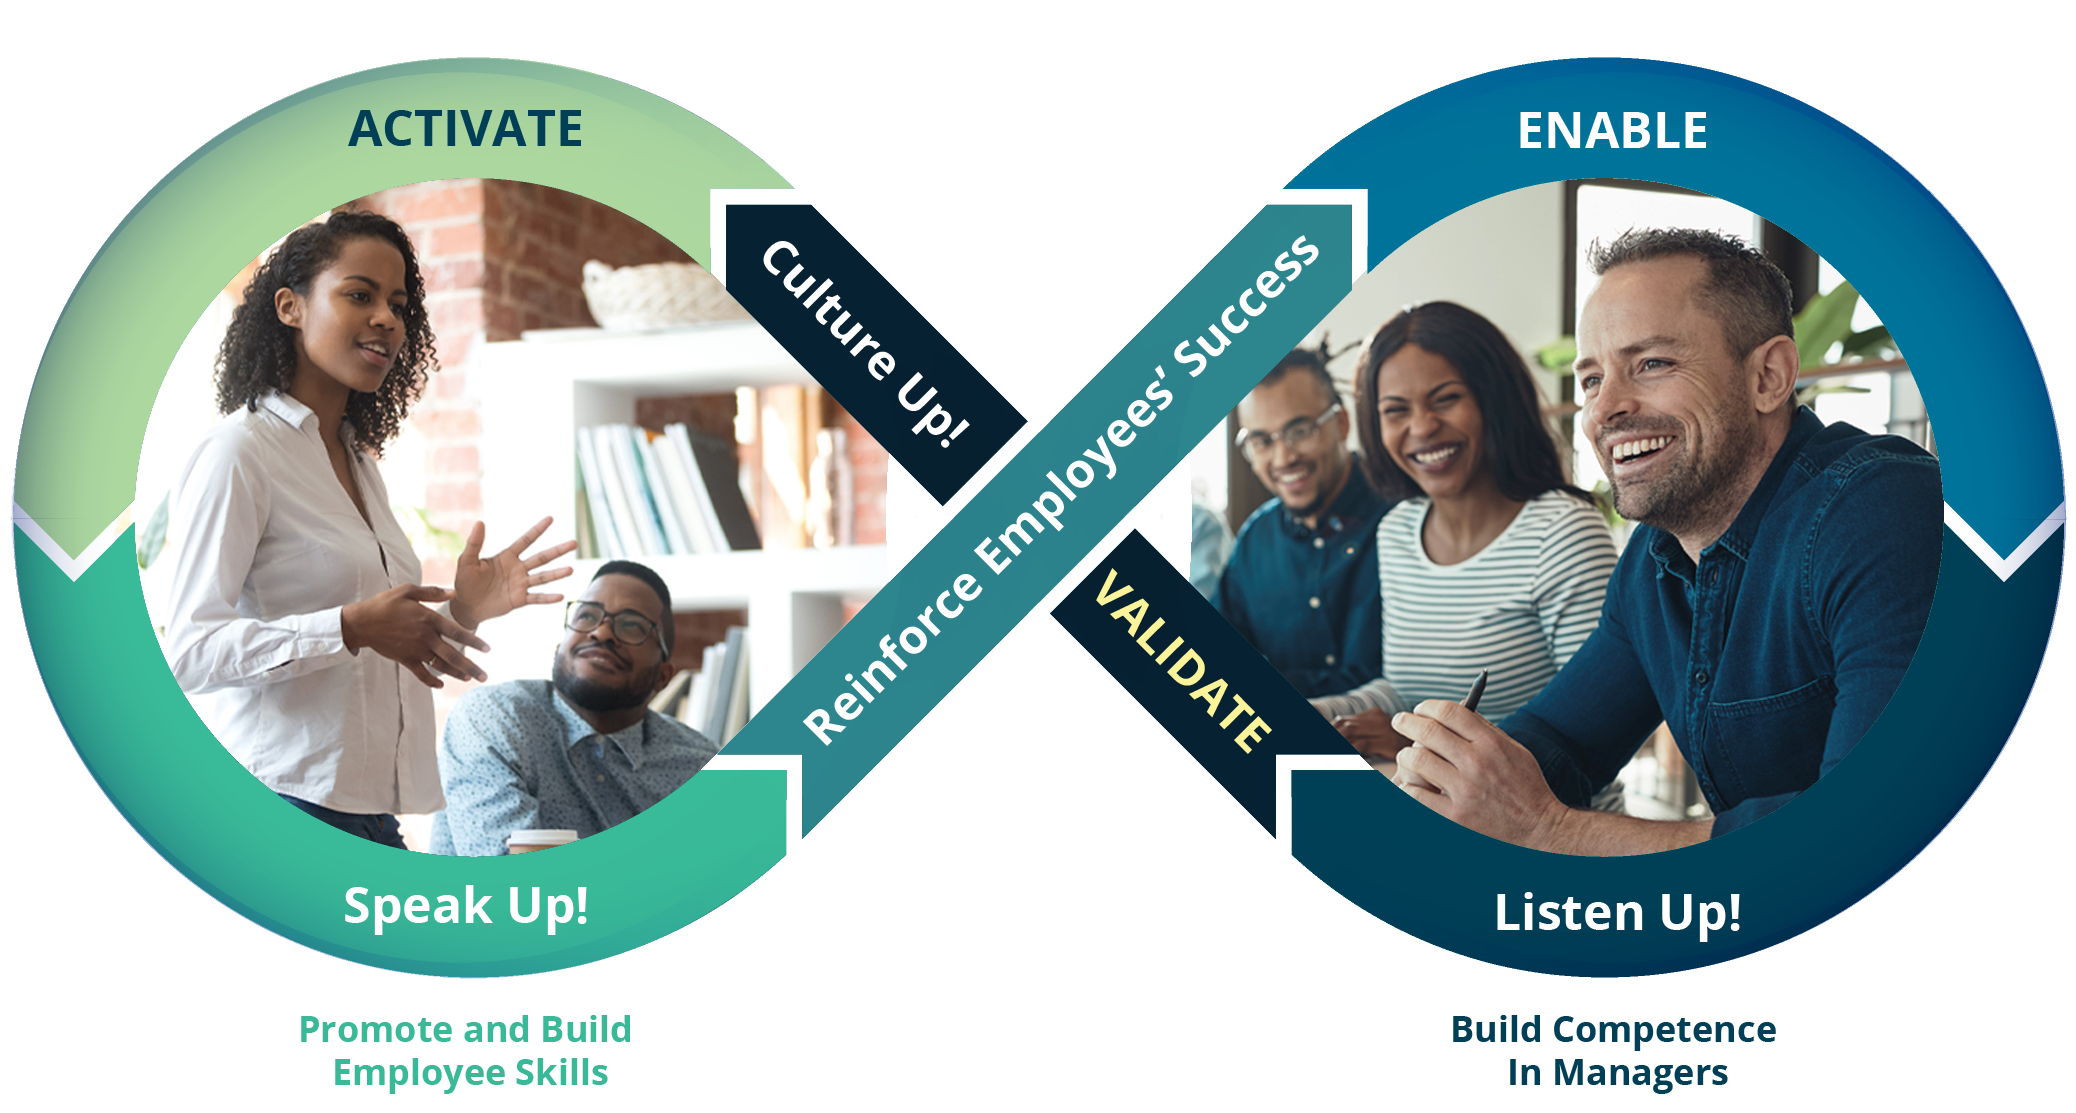 Syntrio - Activate Enable Validate - Culture Up!